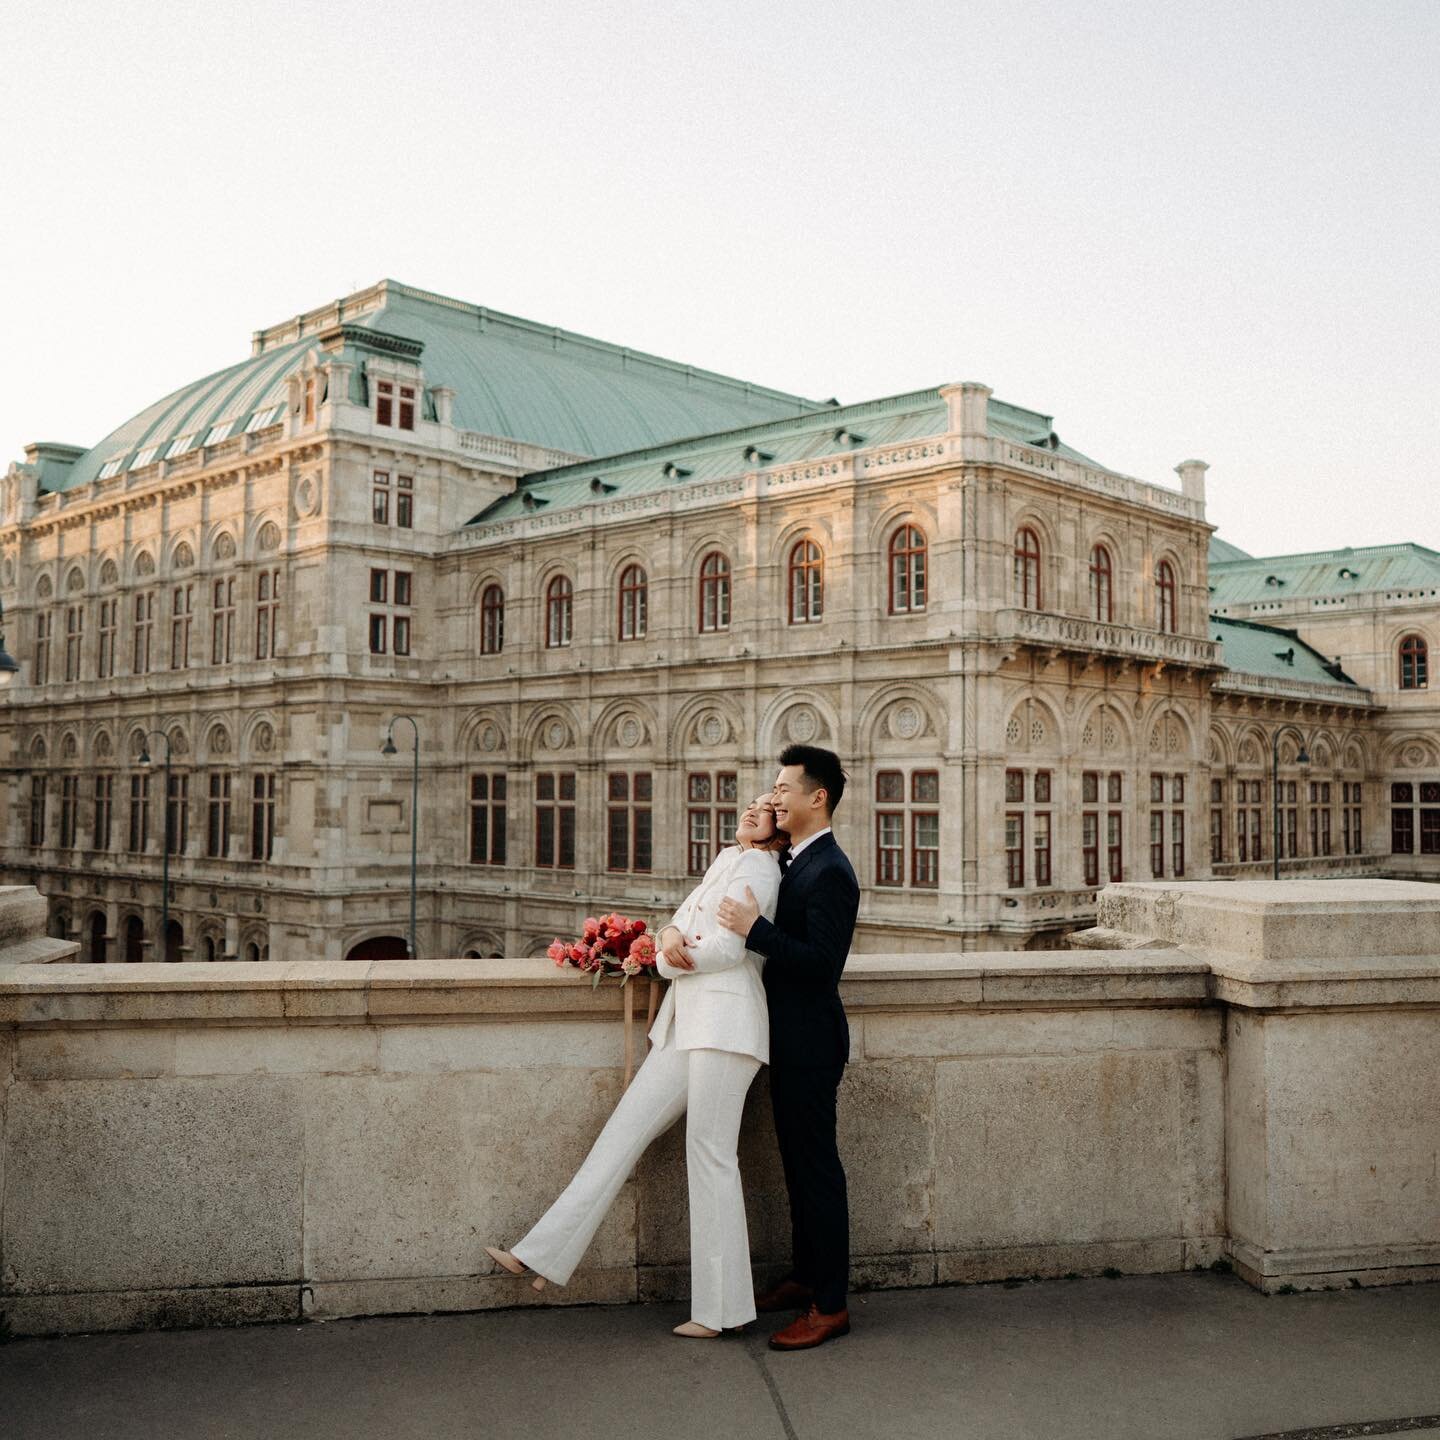 Capture beautiful memories in to photographs and let yourself be enchanted by the magic of Vienna's historic streets 📸

Photo &amp; makeup @ivanguyen_archives 

#weddingphotography&nbsp;#lookslikefilm&nbsp;#dirtybootsandmessyhair&nbsp;#cinematicwedd